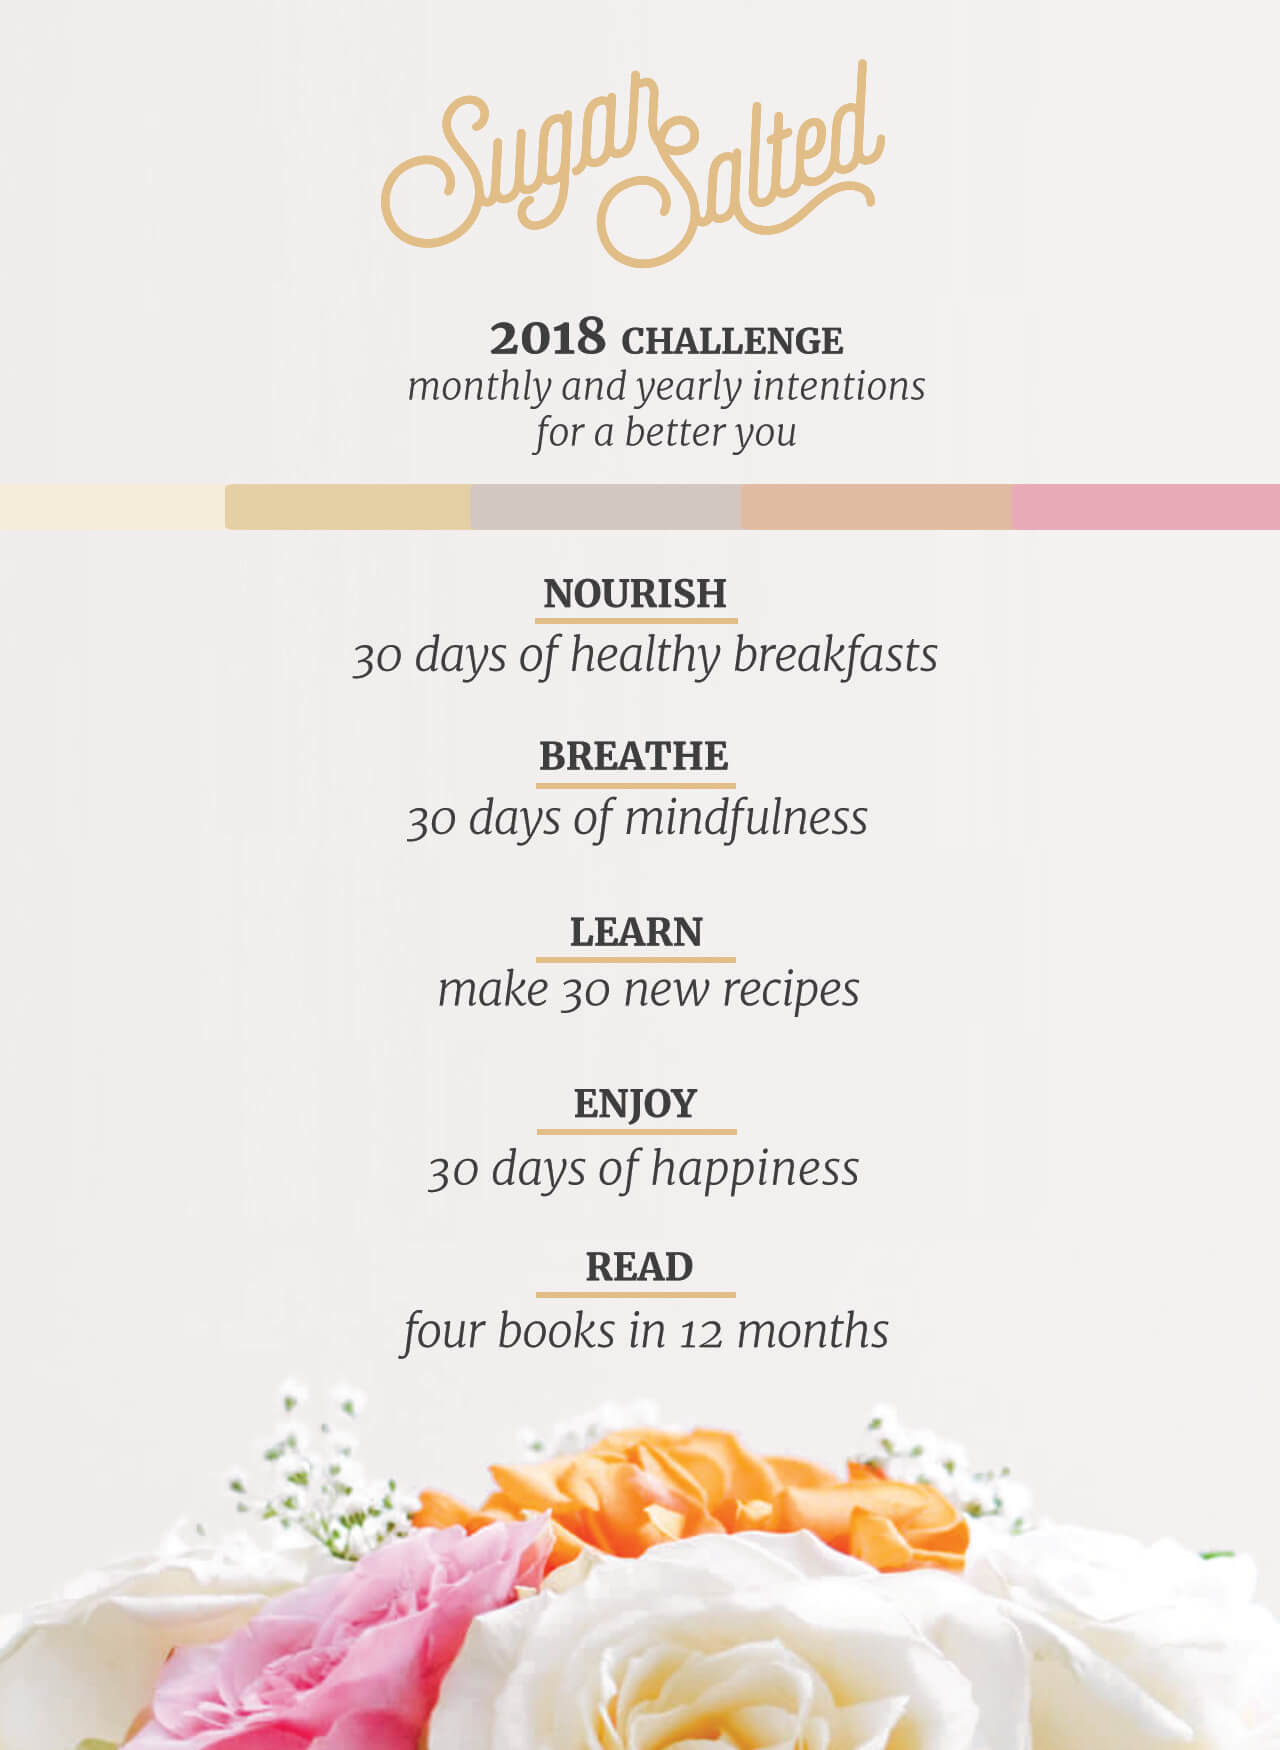 Participate in my ultimate self care and love challenge, the Sugar Salted challenge with monthly and yearly intentions for a better you.